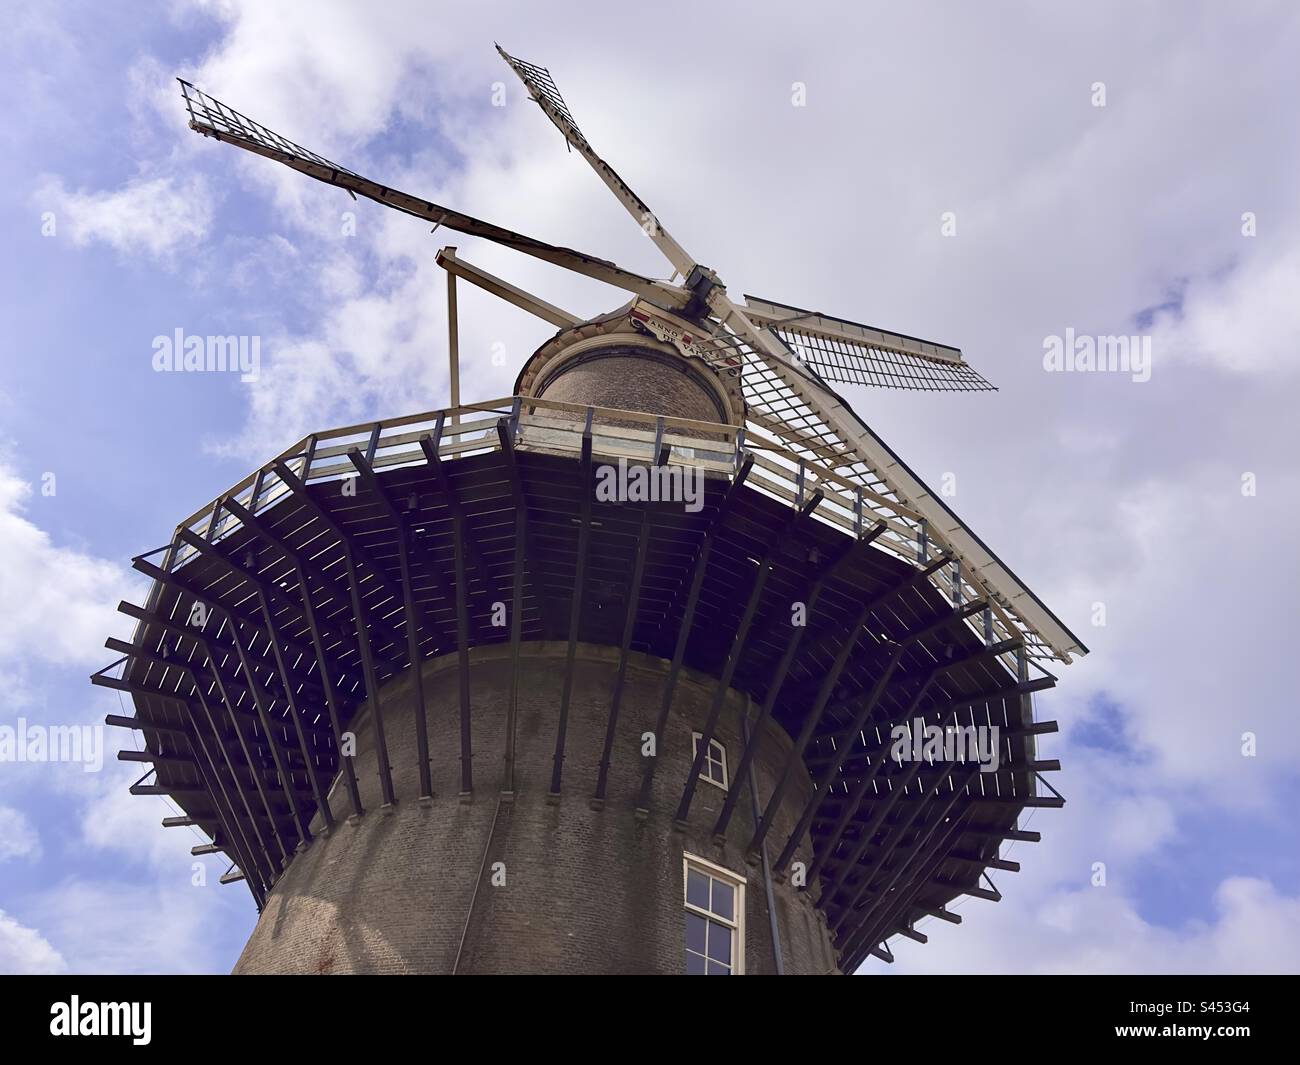 The De Valk windmill museum seen from ground level against a blue and white sky Stock Photo